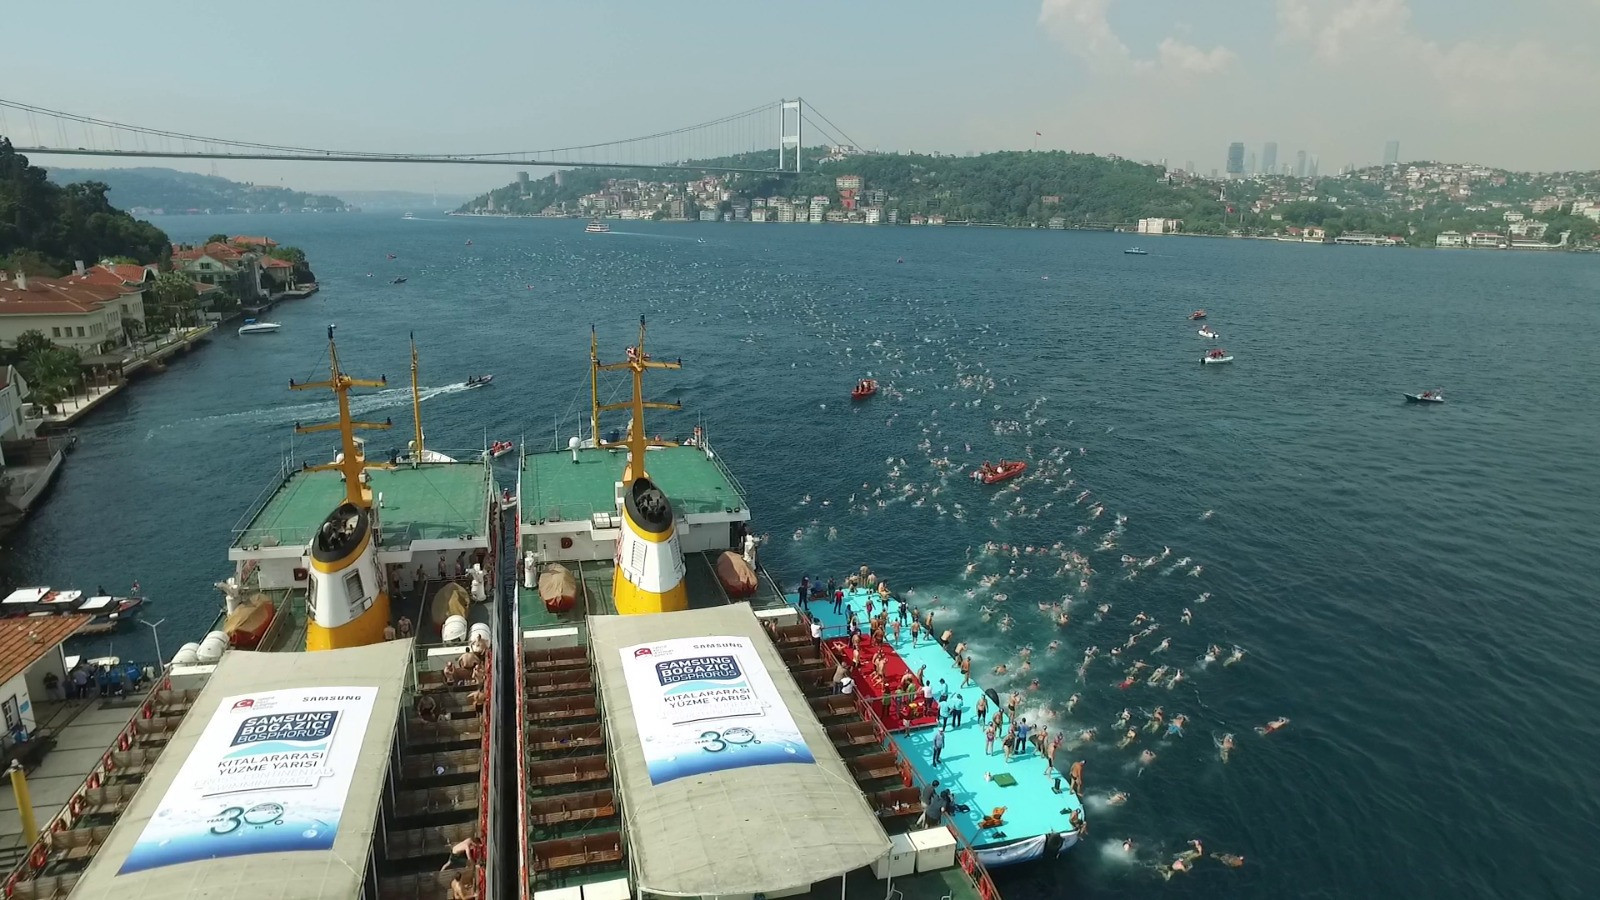 More than 2,000 take part in Bosphorus CrossContinental Swimming Race